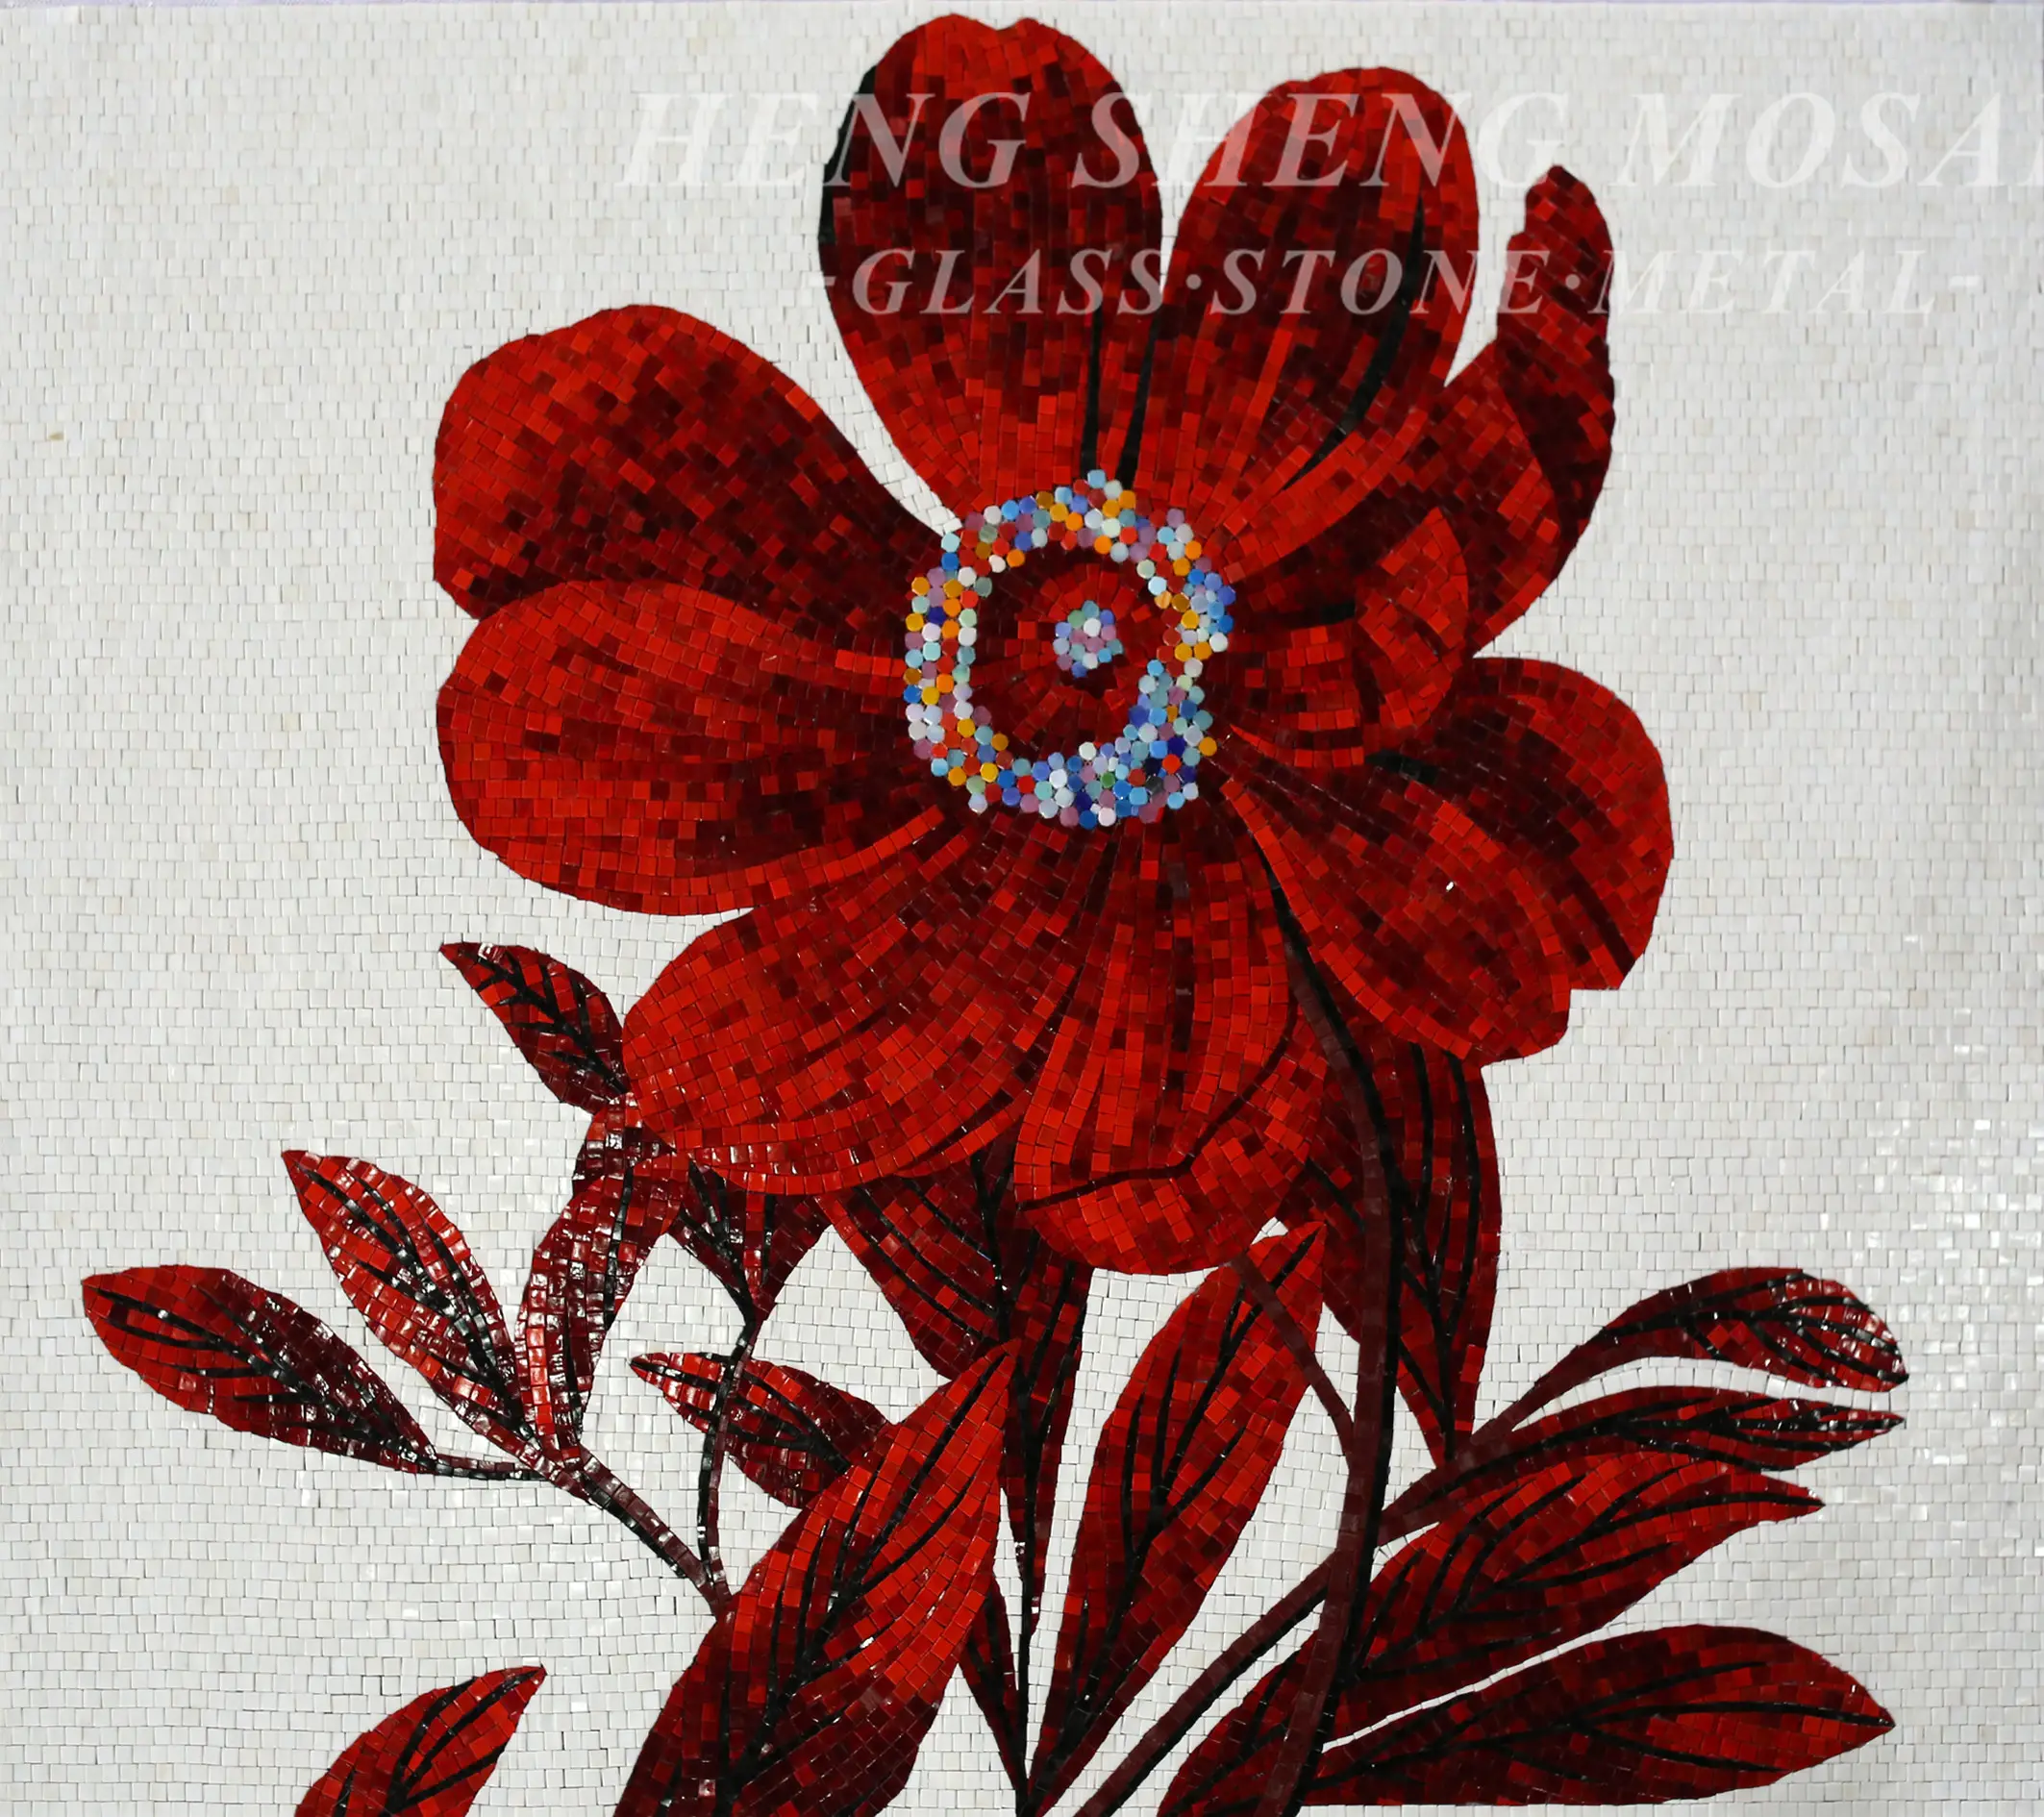 Newly Design Fabulous Red Flower Home Decorative Mural Art Wall Mosaic Tiles Picture Pattern Tiles